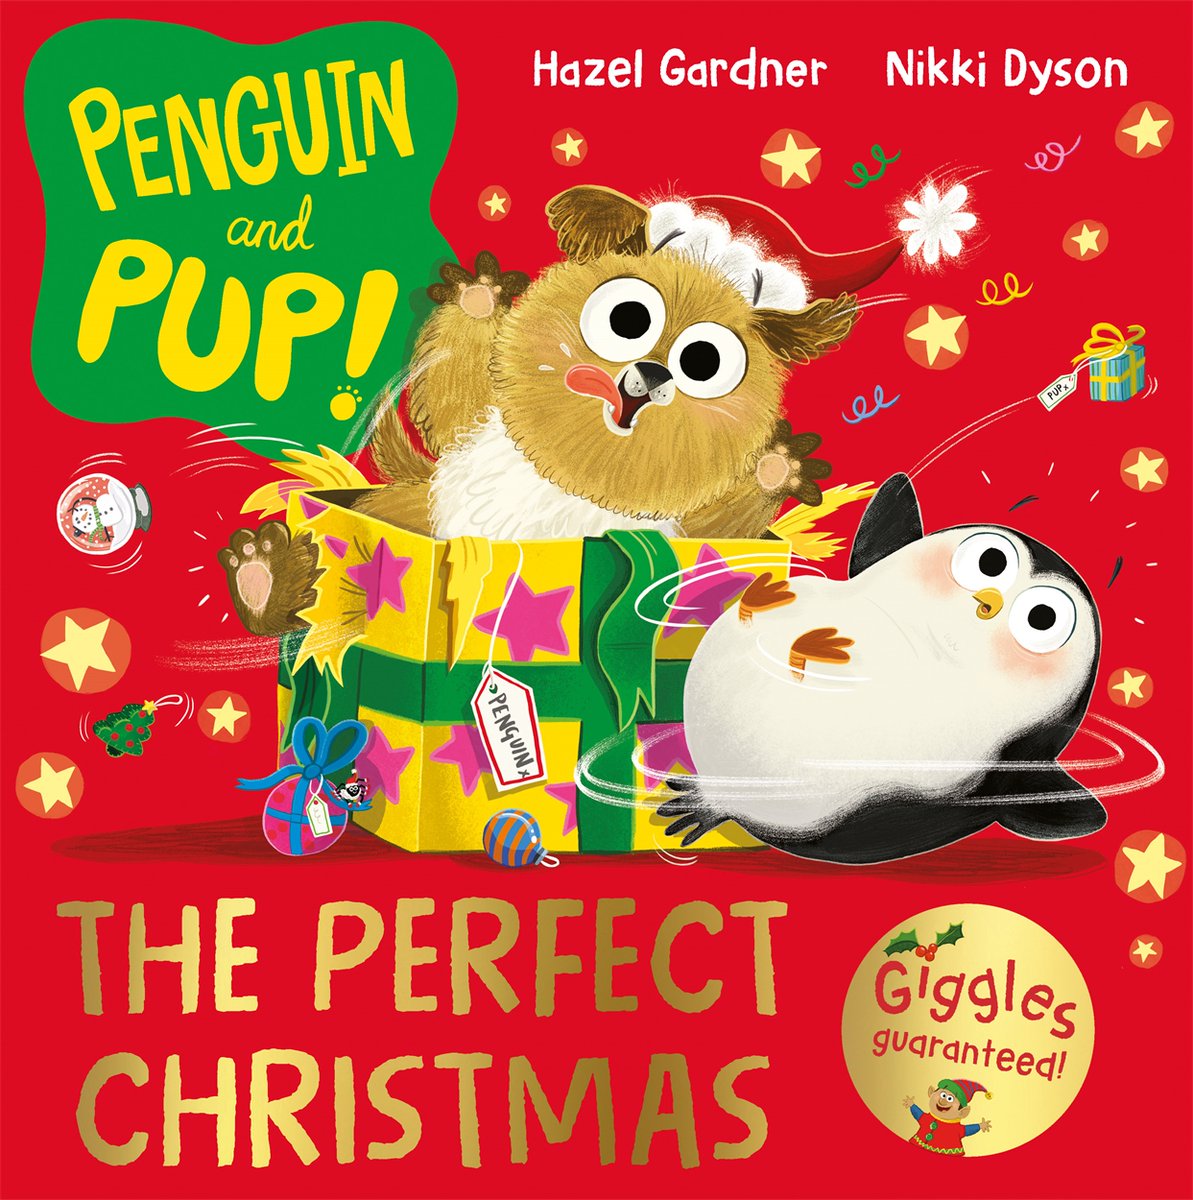 I’m so happy to introduce Penguin and Pup, who will star in four books published by @MacmillanKidsUK, with the first - The Perfect Christmas - out on 24 Oct. Illustrations are by the incredible @DoodleDyson who has brought P&P to life in a way I could only have dreamed of!